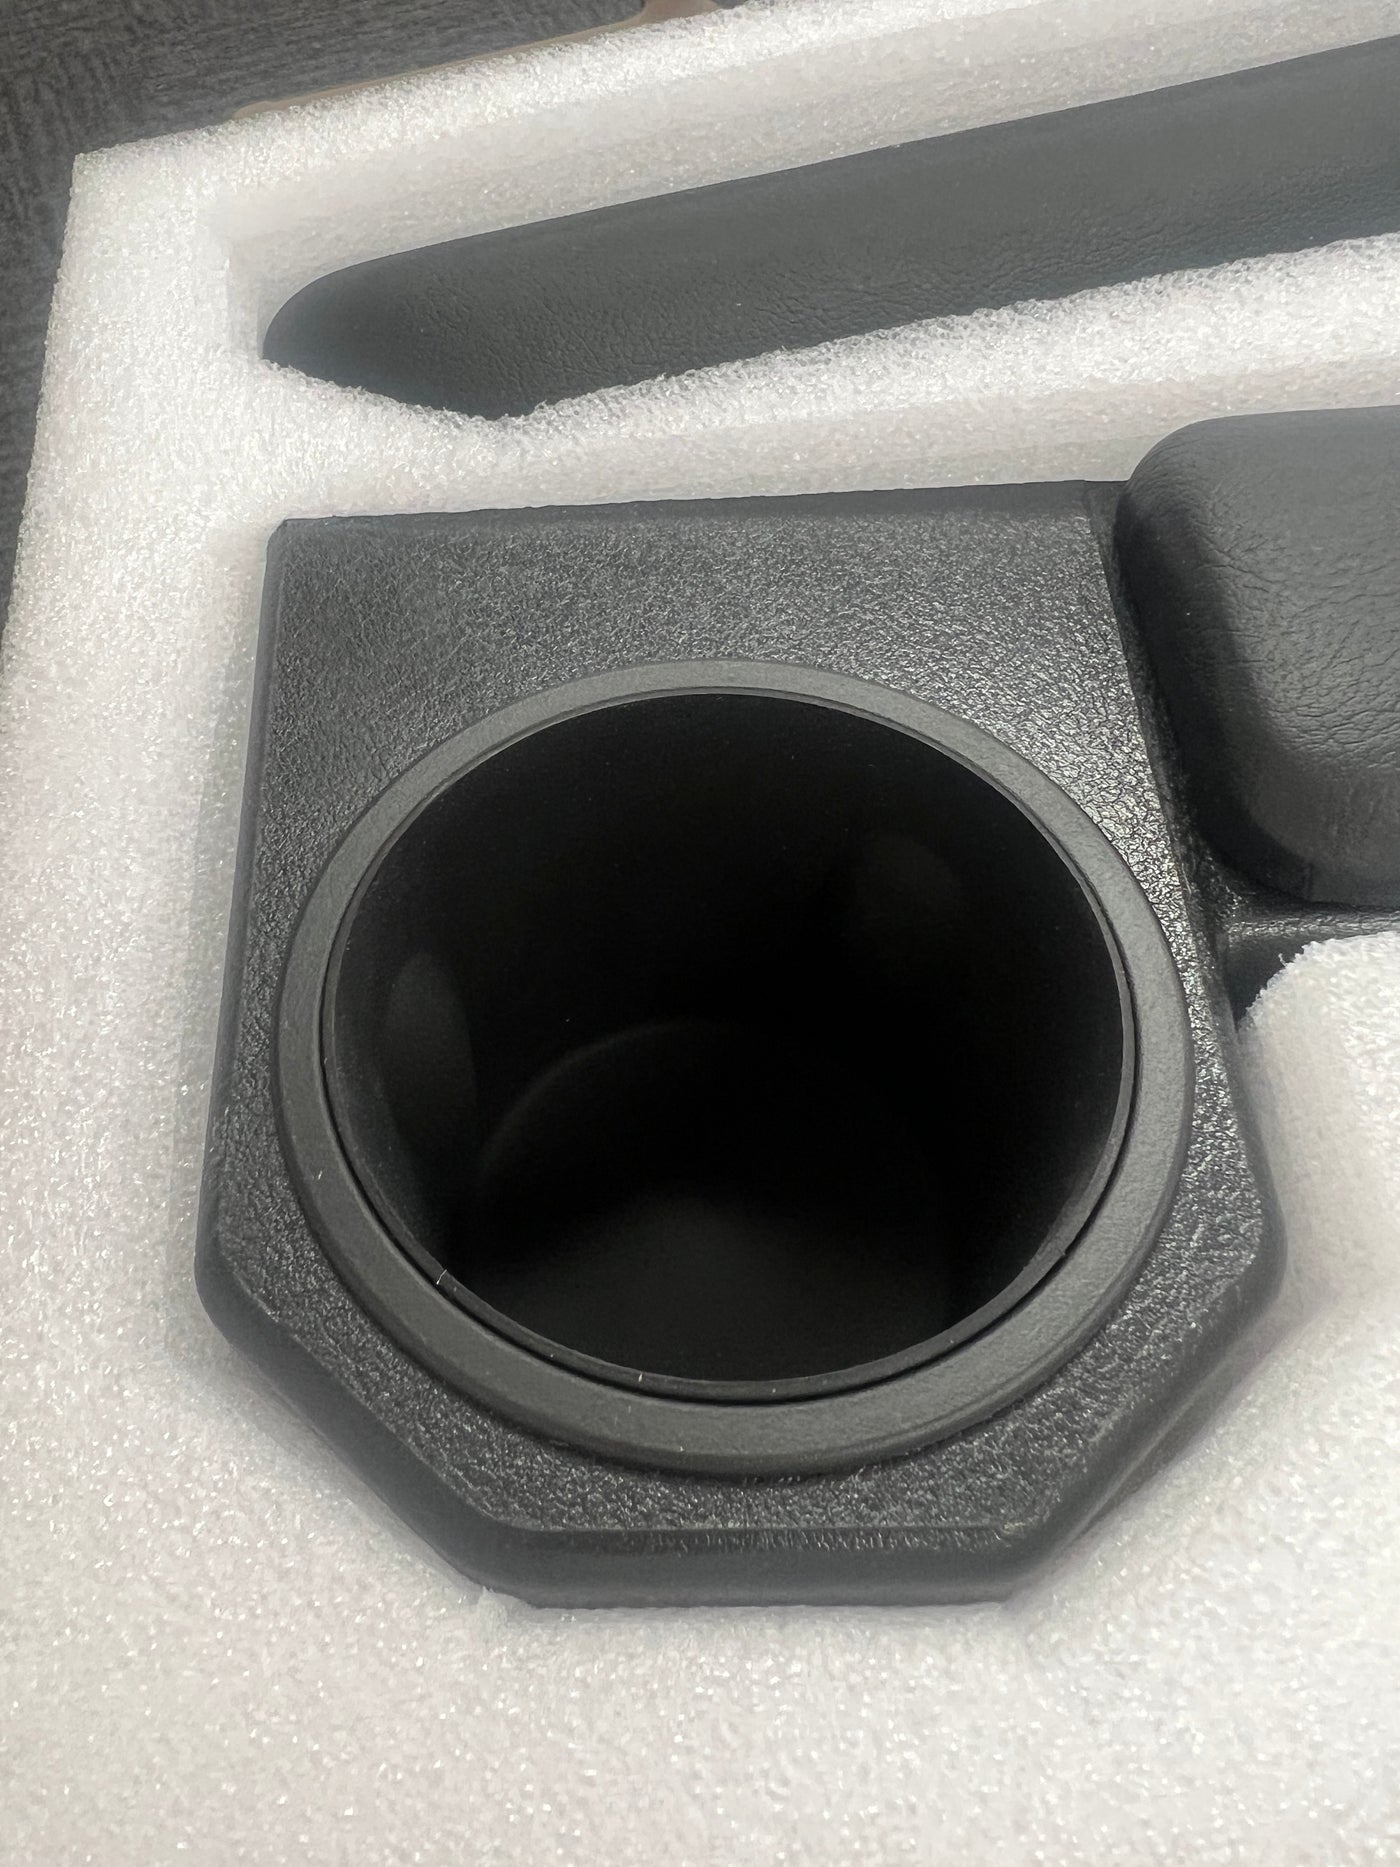 Cup Holder Black Suitable For Toyota land Cruiser 79,78,76,75,70 - OZI4X4 PTY LTD